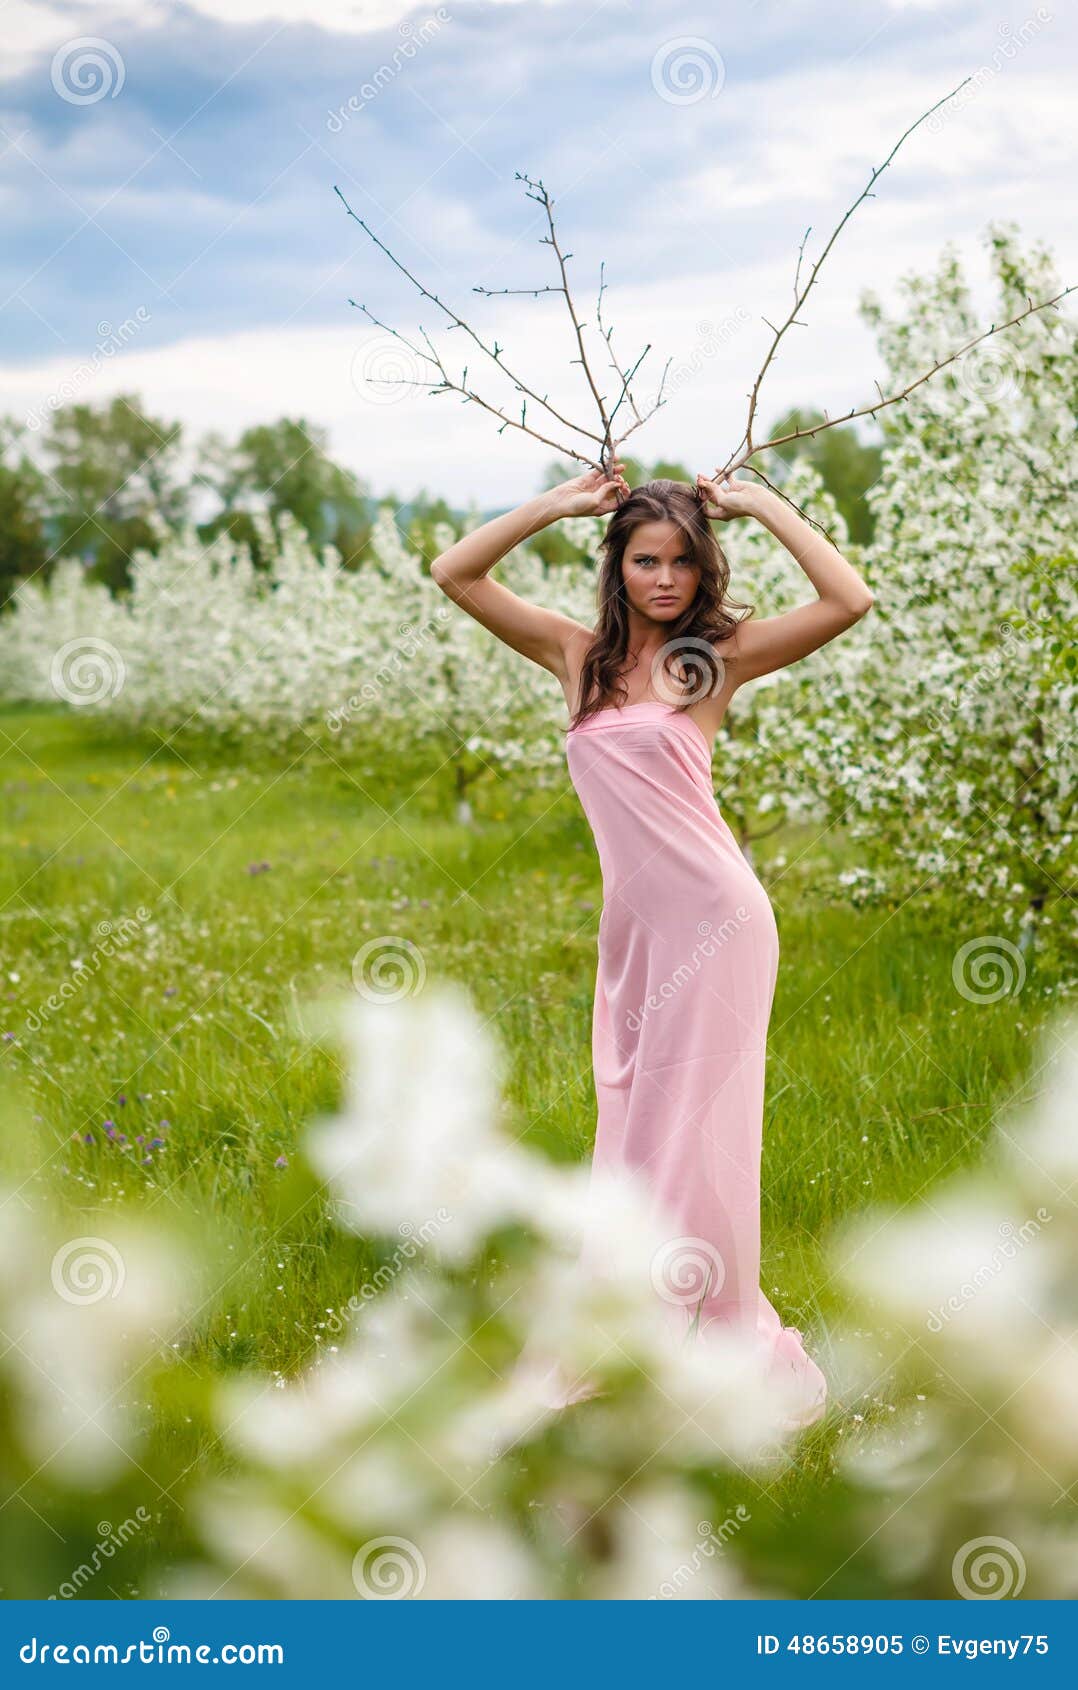 Girl With The Blossoming Apple Trees Stock Image Image Of Adult Dress 48658905